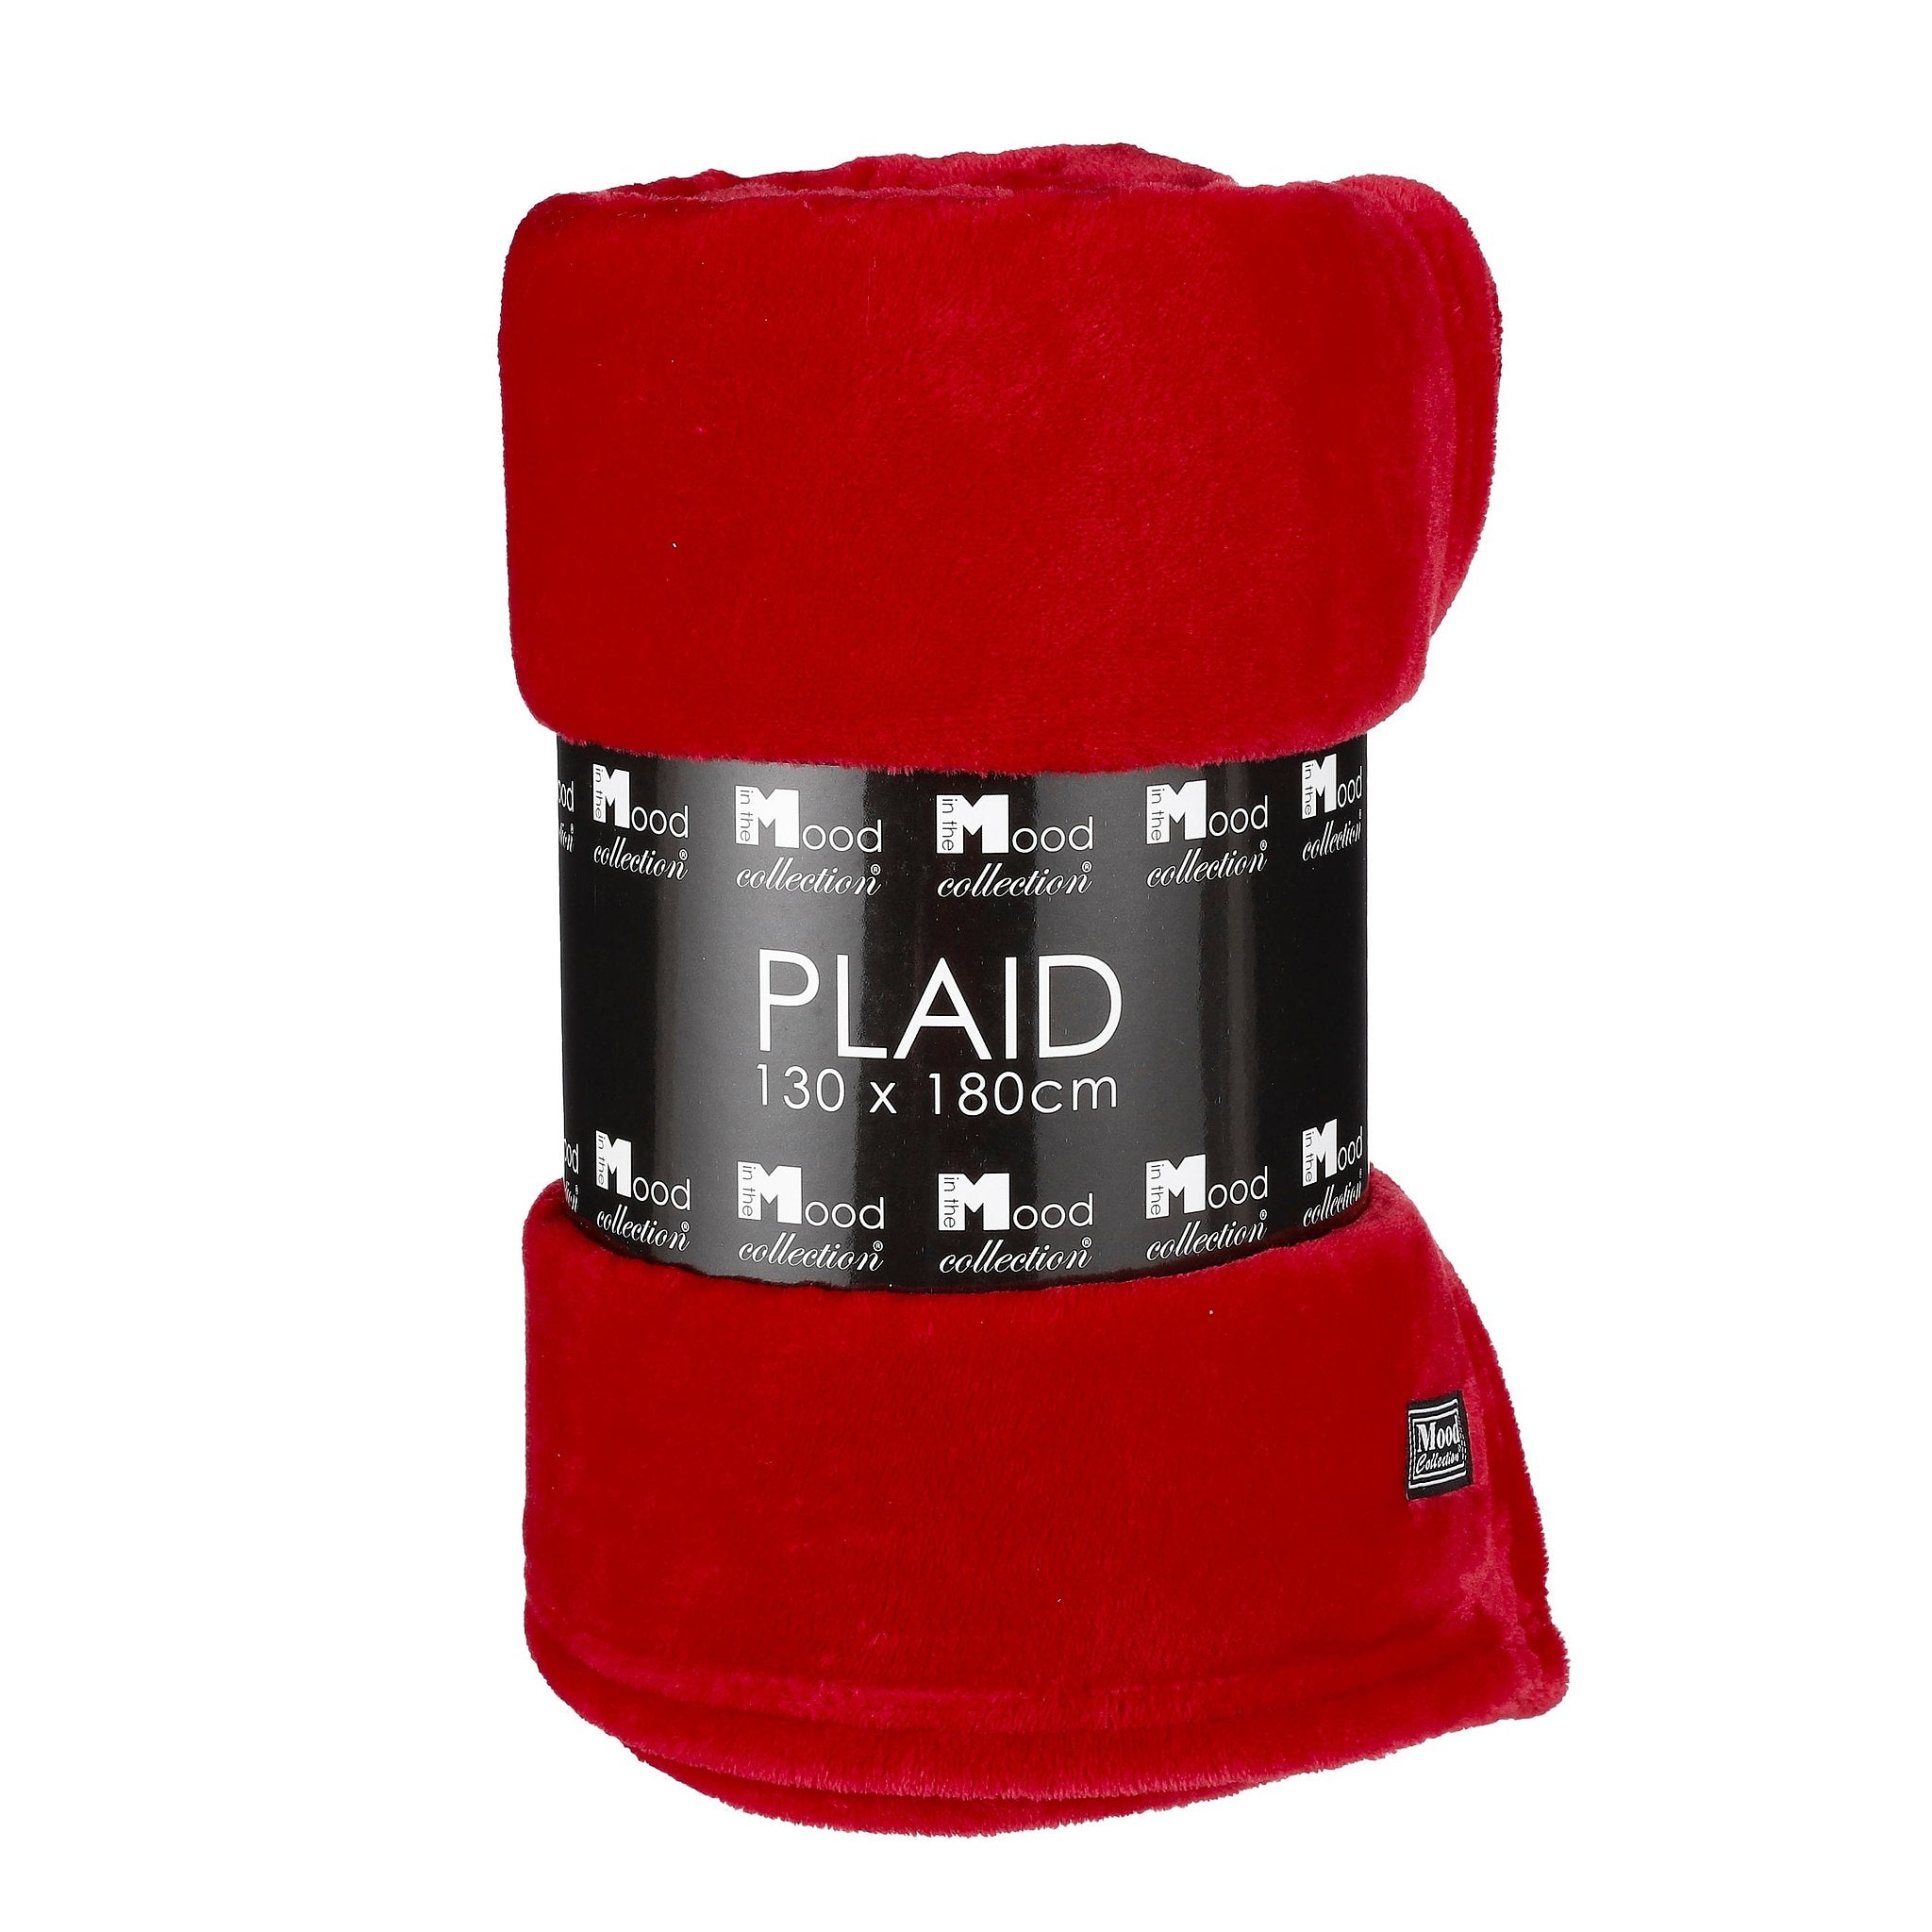 In The Mood Collection Famke Fleece Plaid - L180 x W130 cm - Red